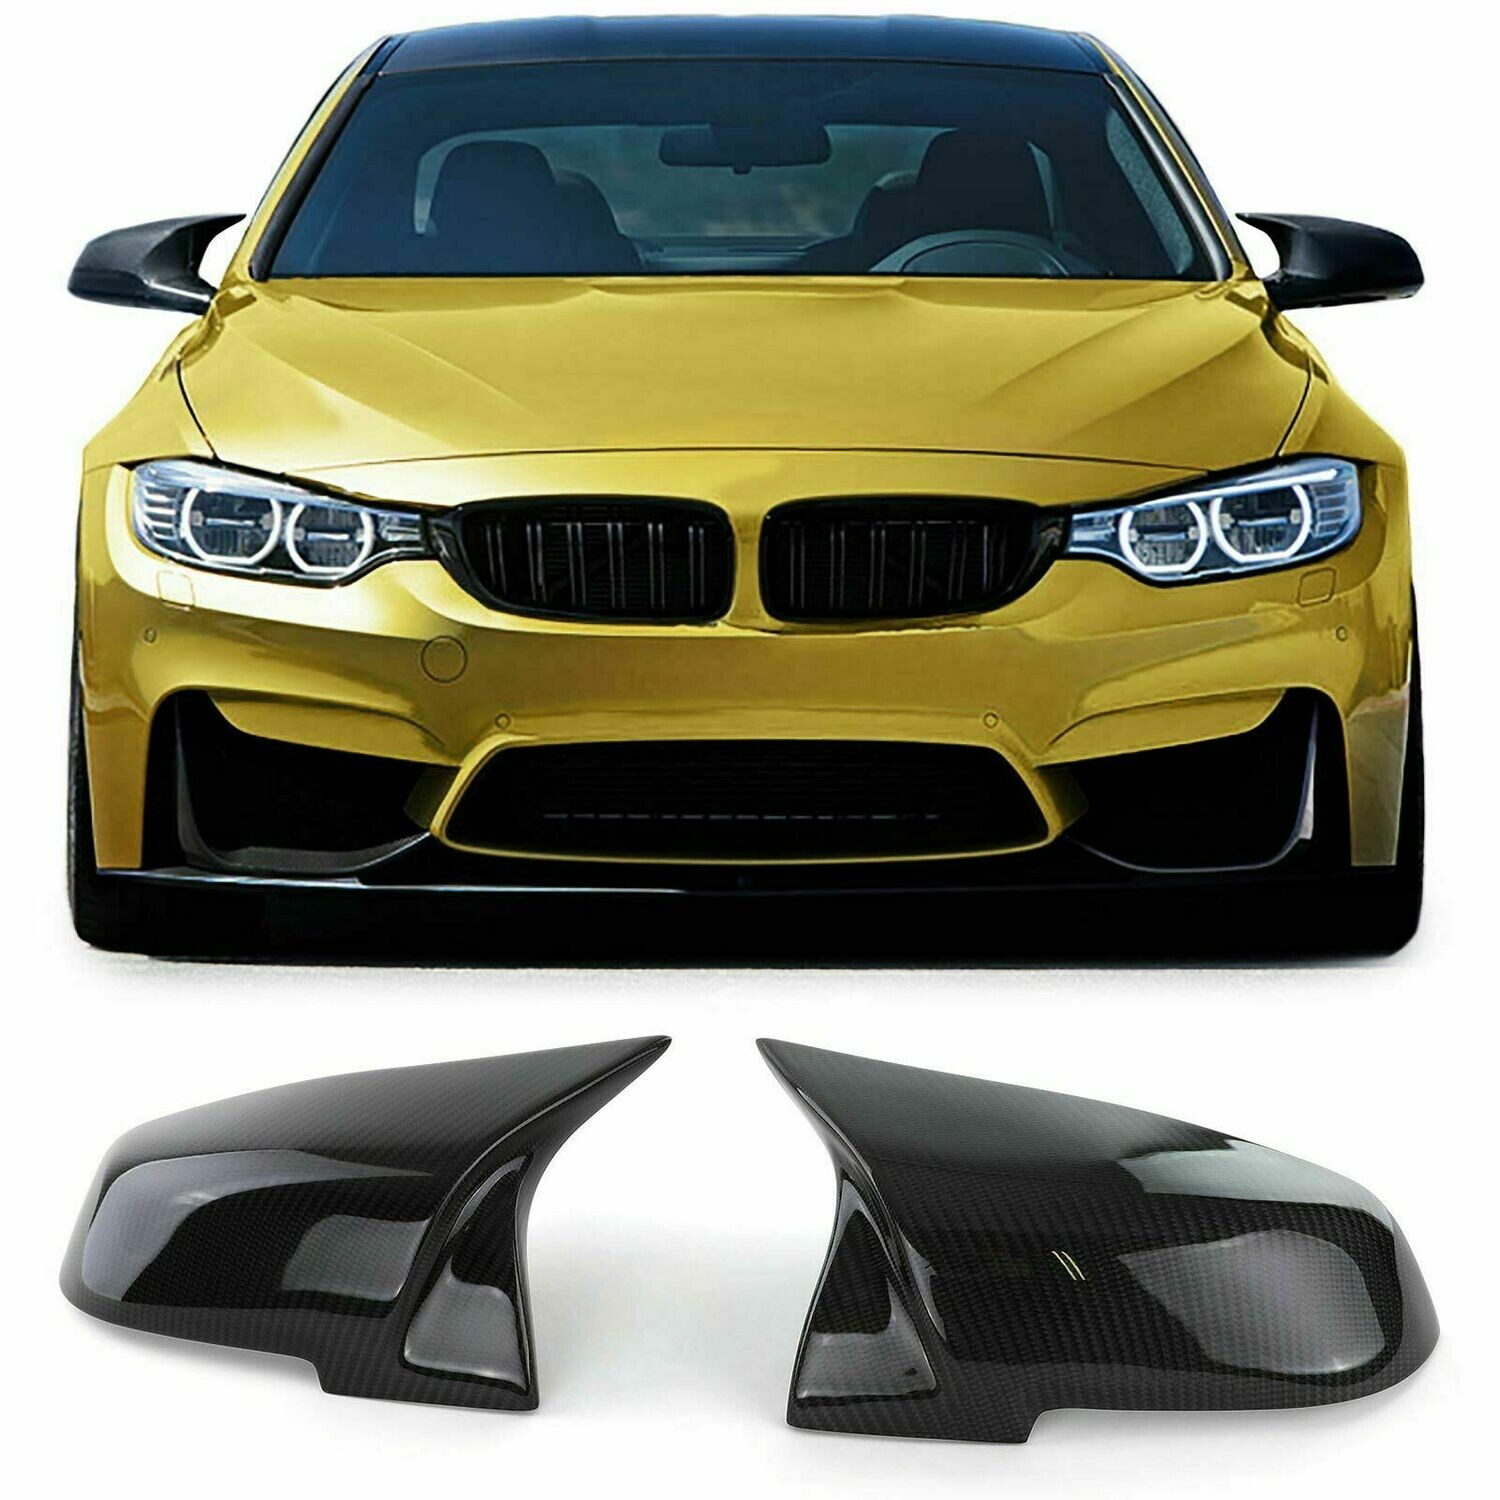 Gloss Black ABS Side Rearview Mirror Cap Cover Trim For BMW 3 4 Series GT F30 F31 f32 f33 F34 F36 2013-2019 Auto Accessories